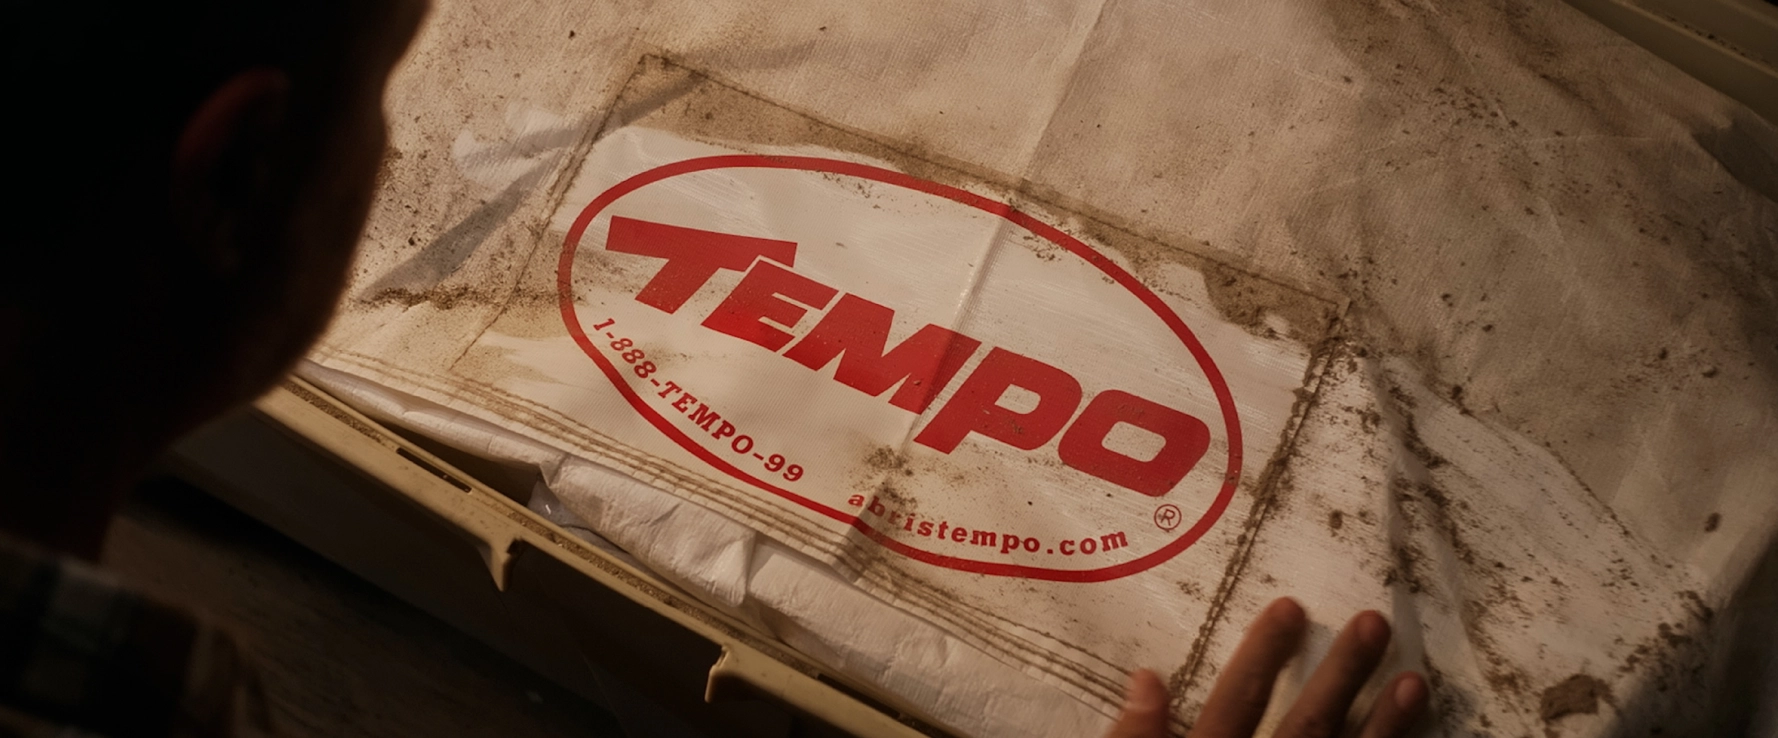 50 YEARS OF TEMPO